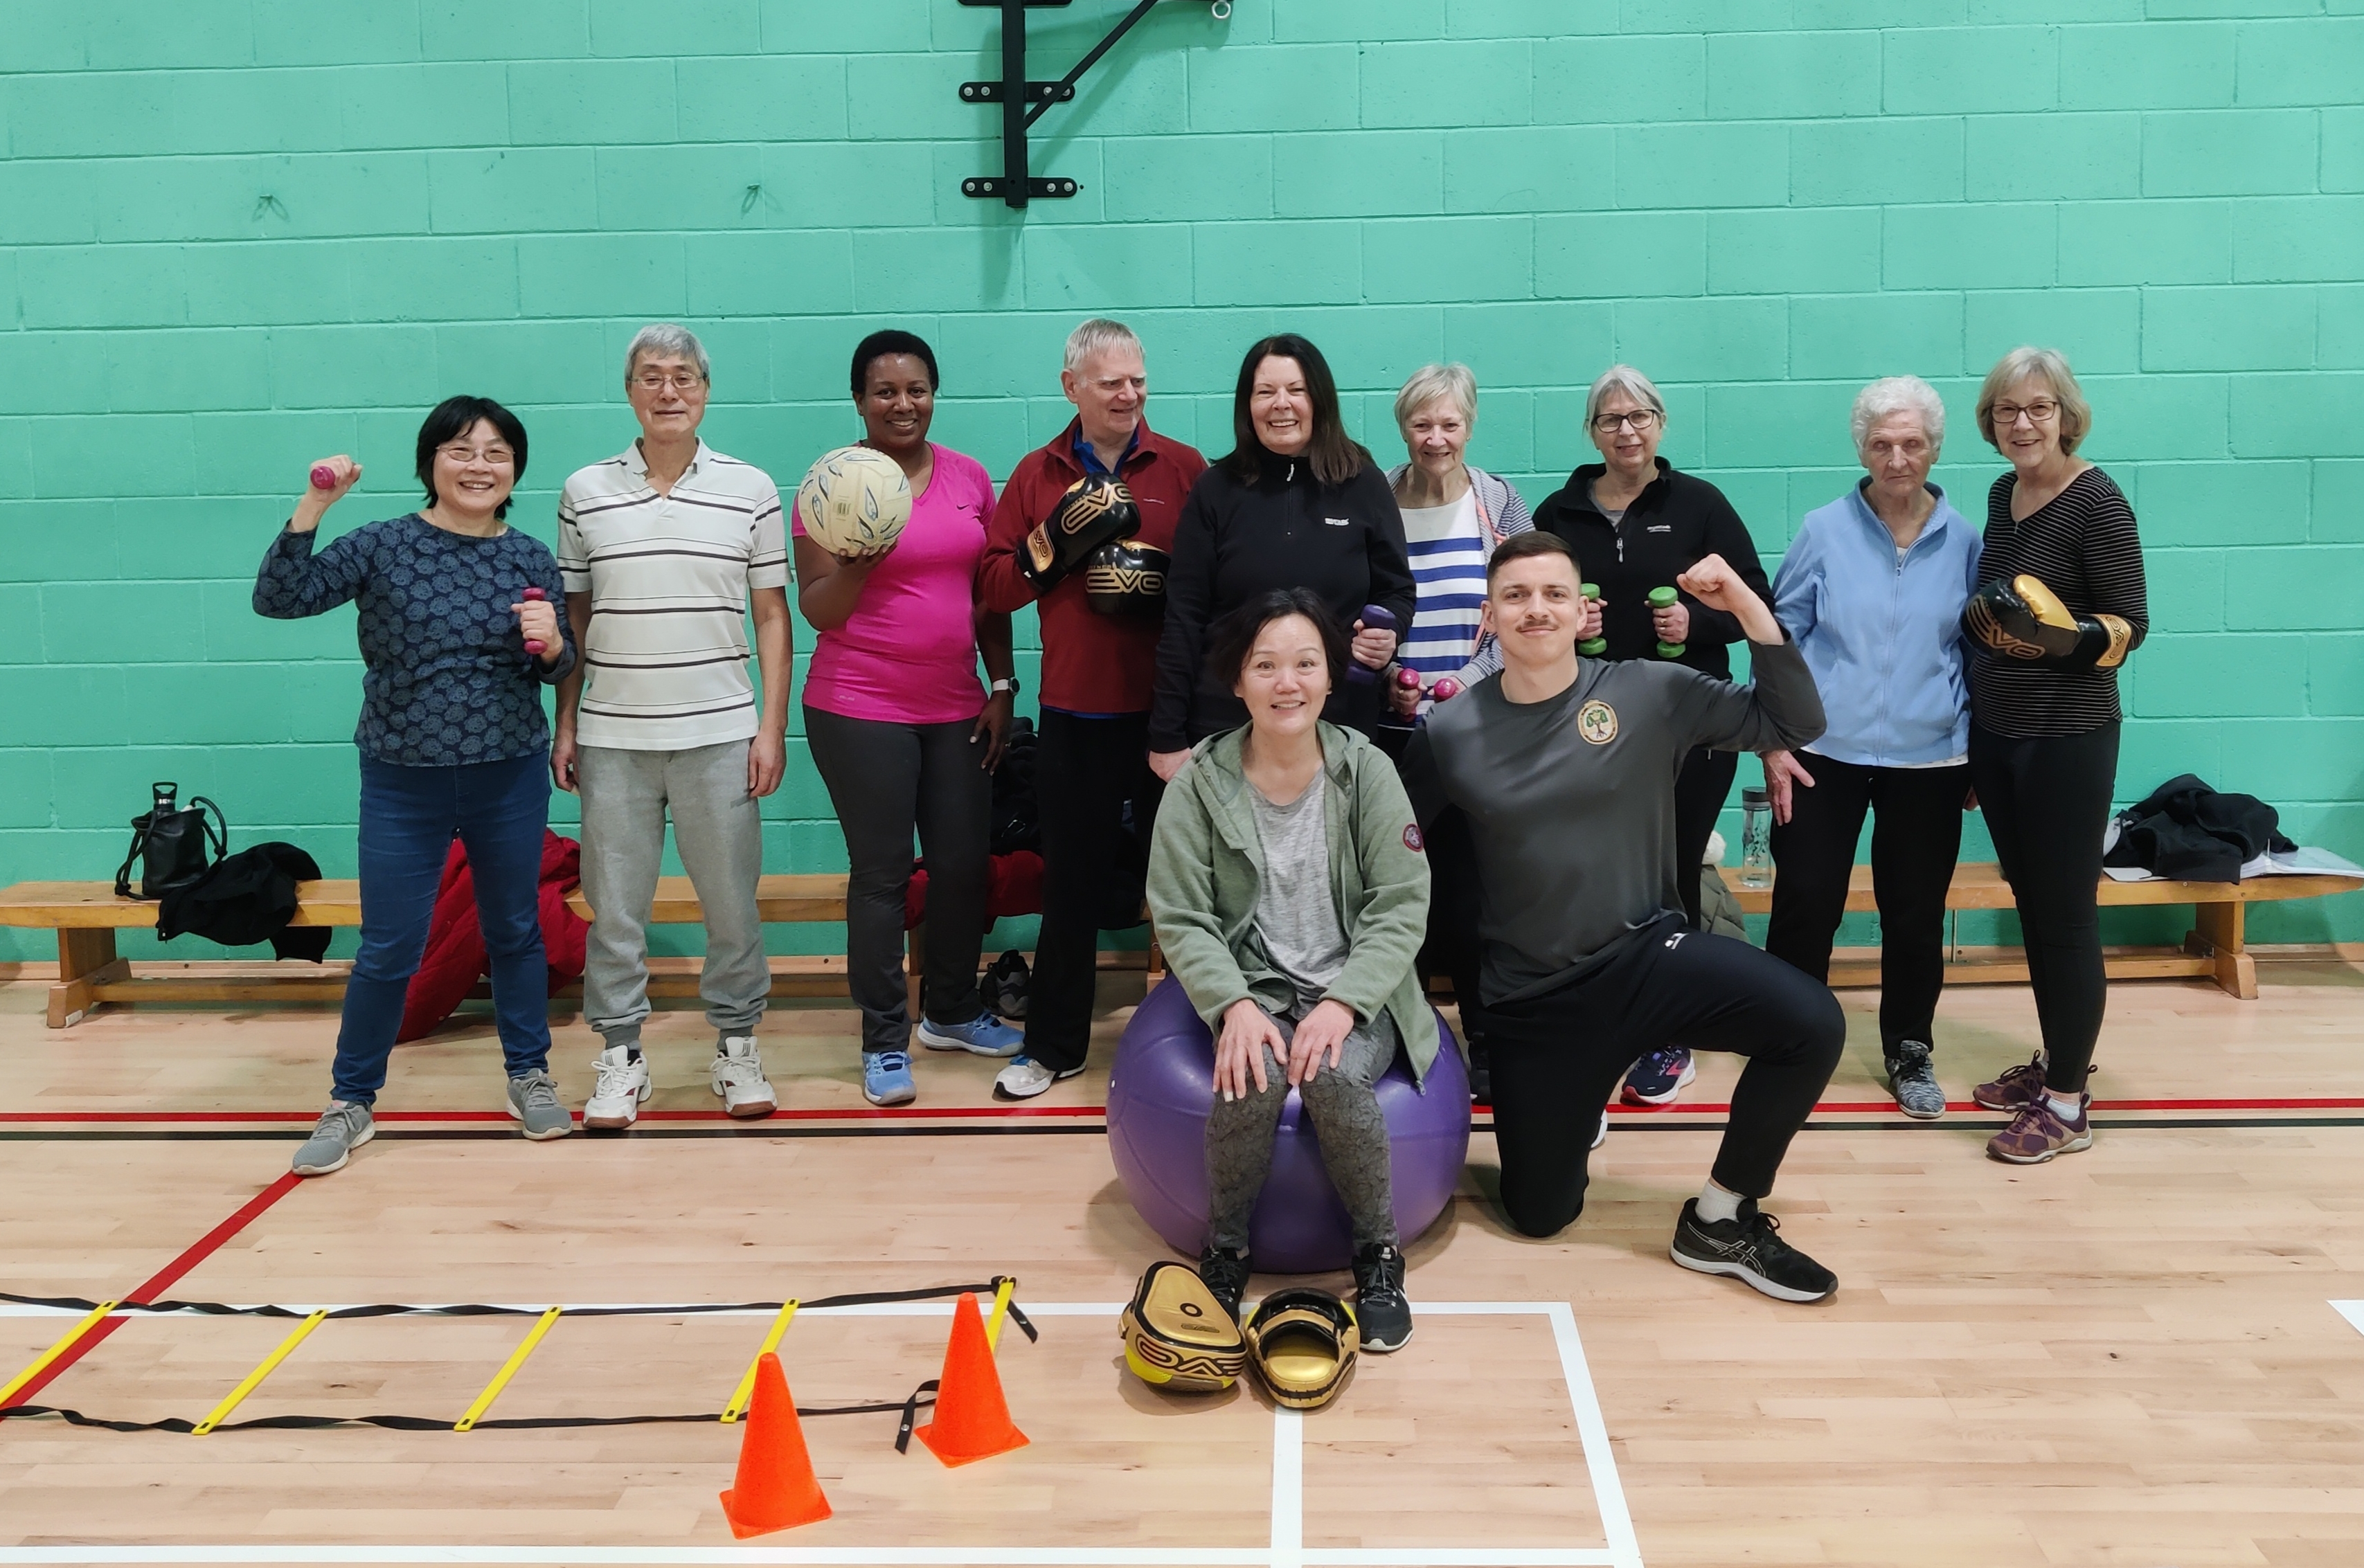 Group of adults in a sports hall holding balls.